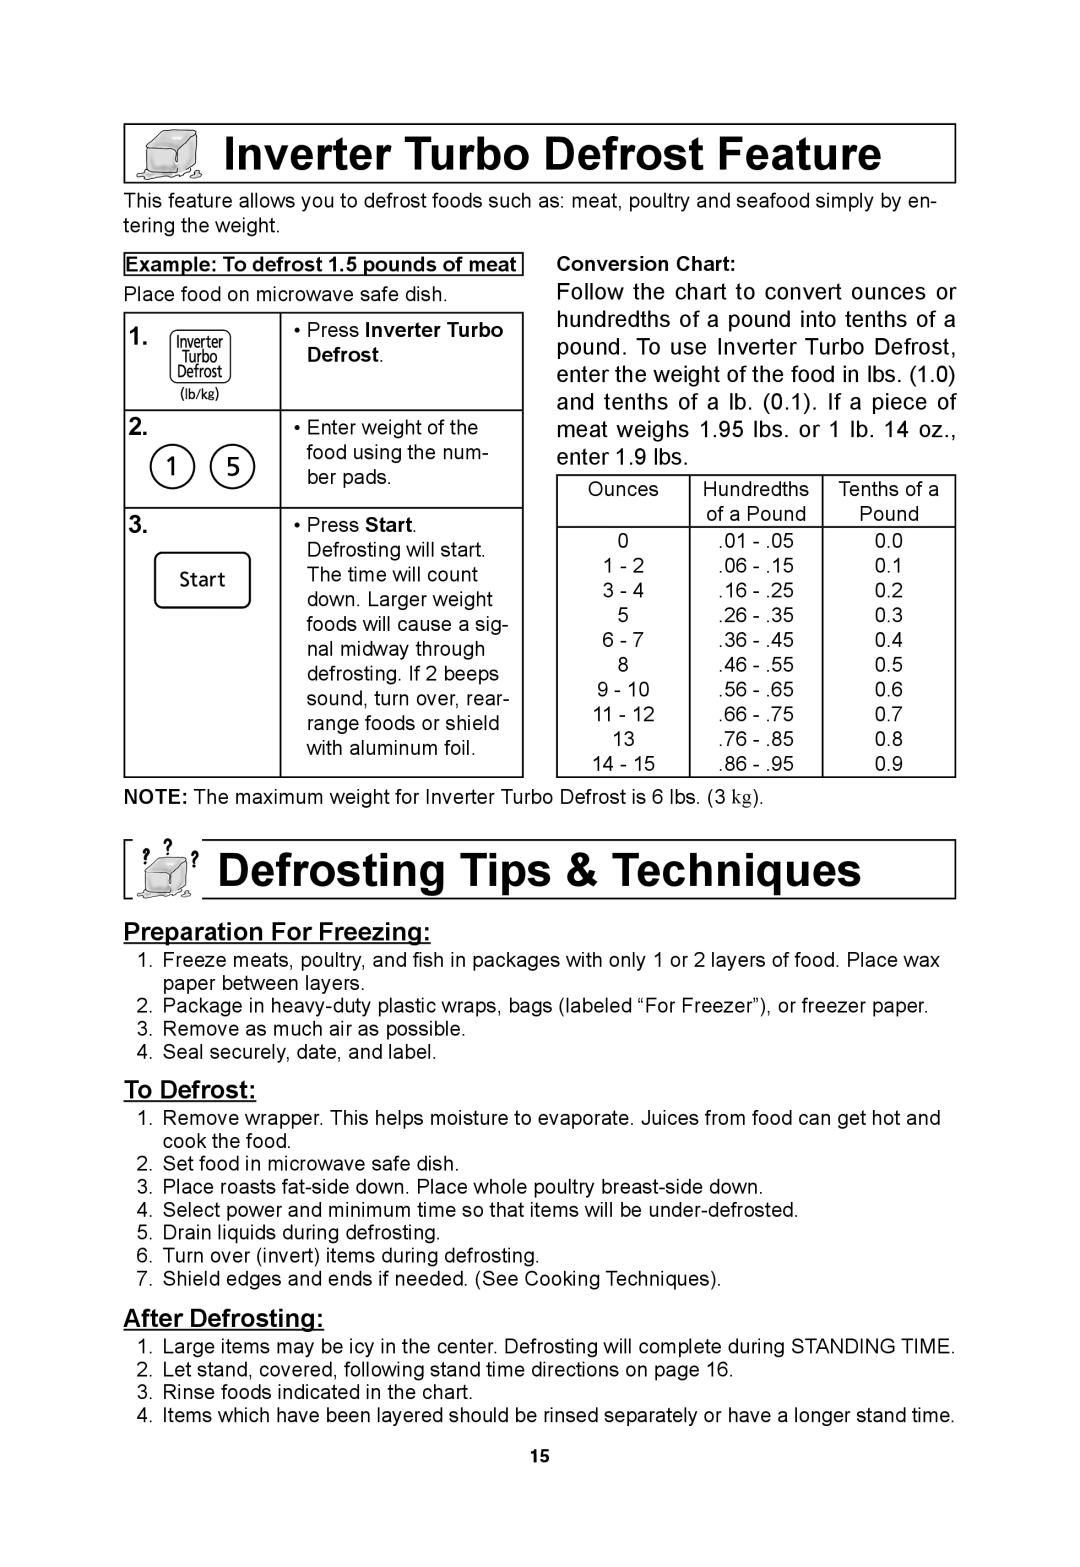 Panasonic NNSN773S Inverter Turbo Defrost Feature, Defrosting Tips & Techniques, Preparation For Freezing, To Defrost 